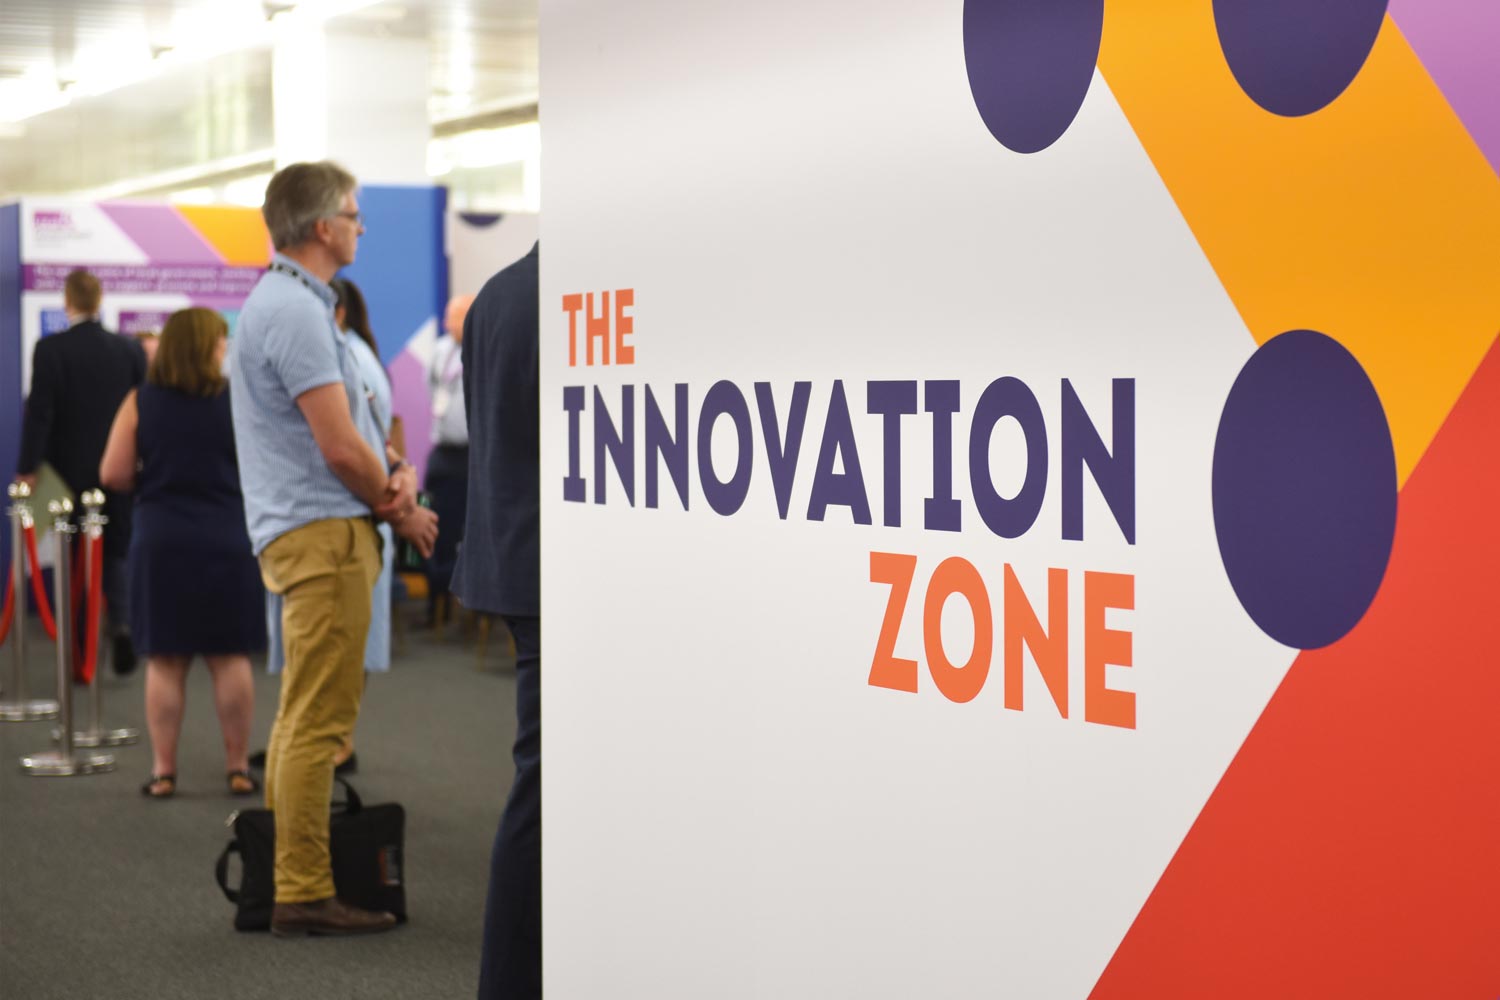 A sign saying The Innovation Zone in a conference hall with delegates mingling nearby